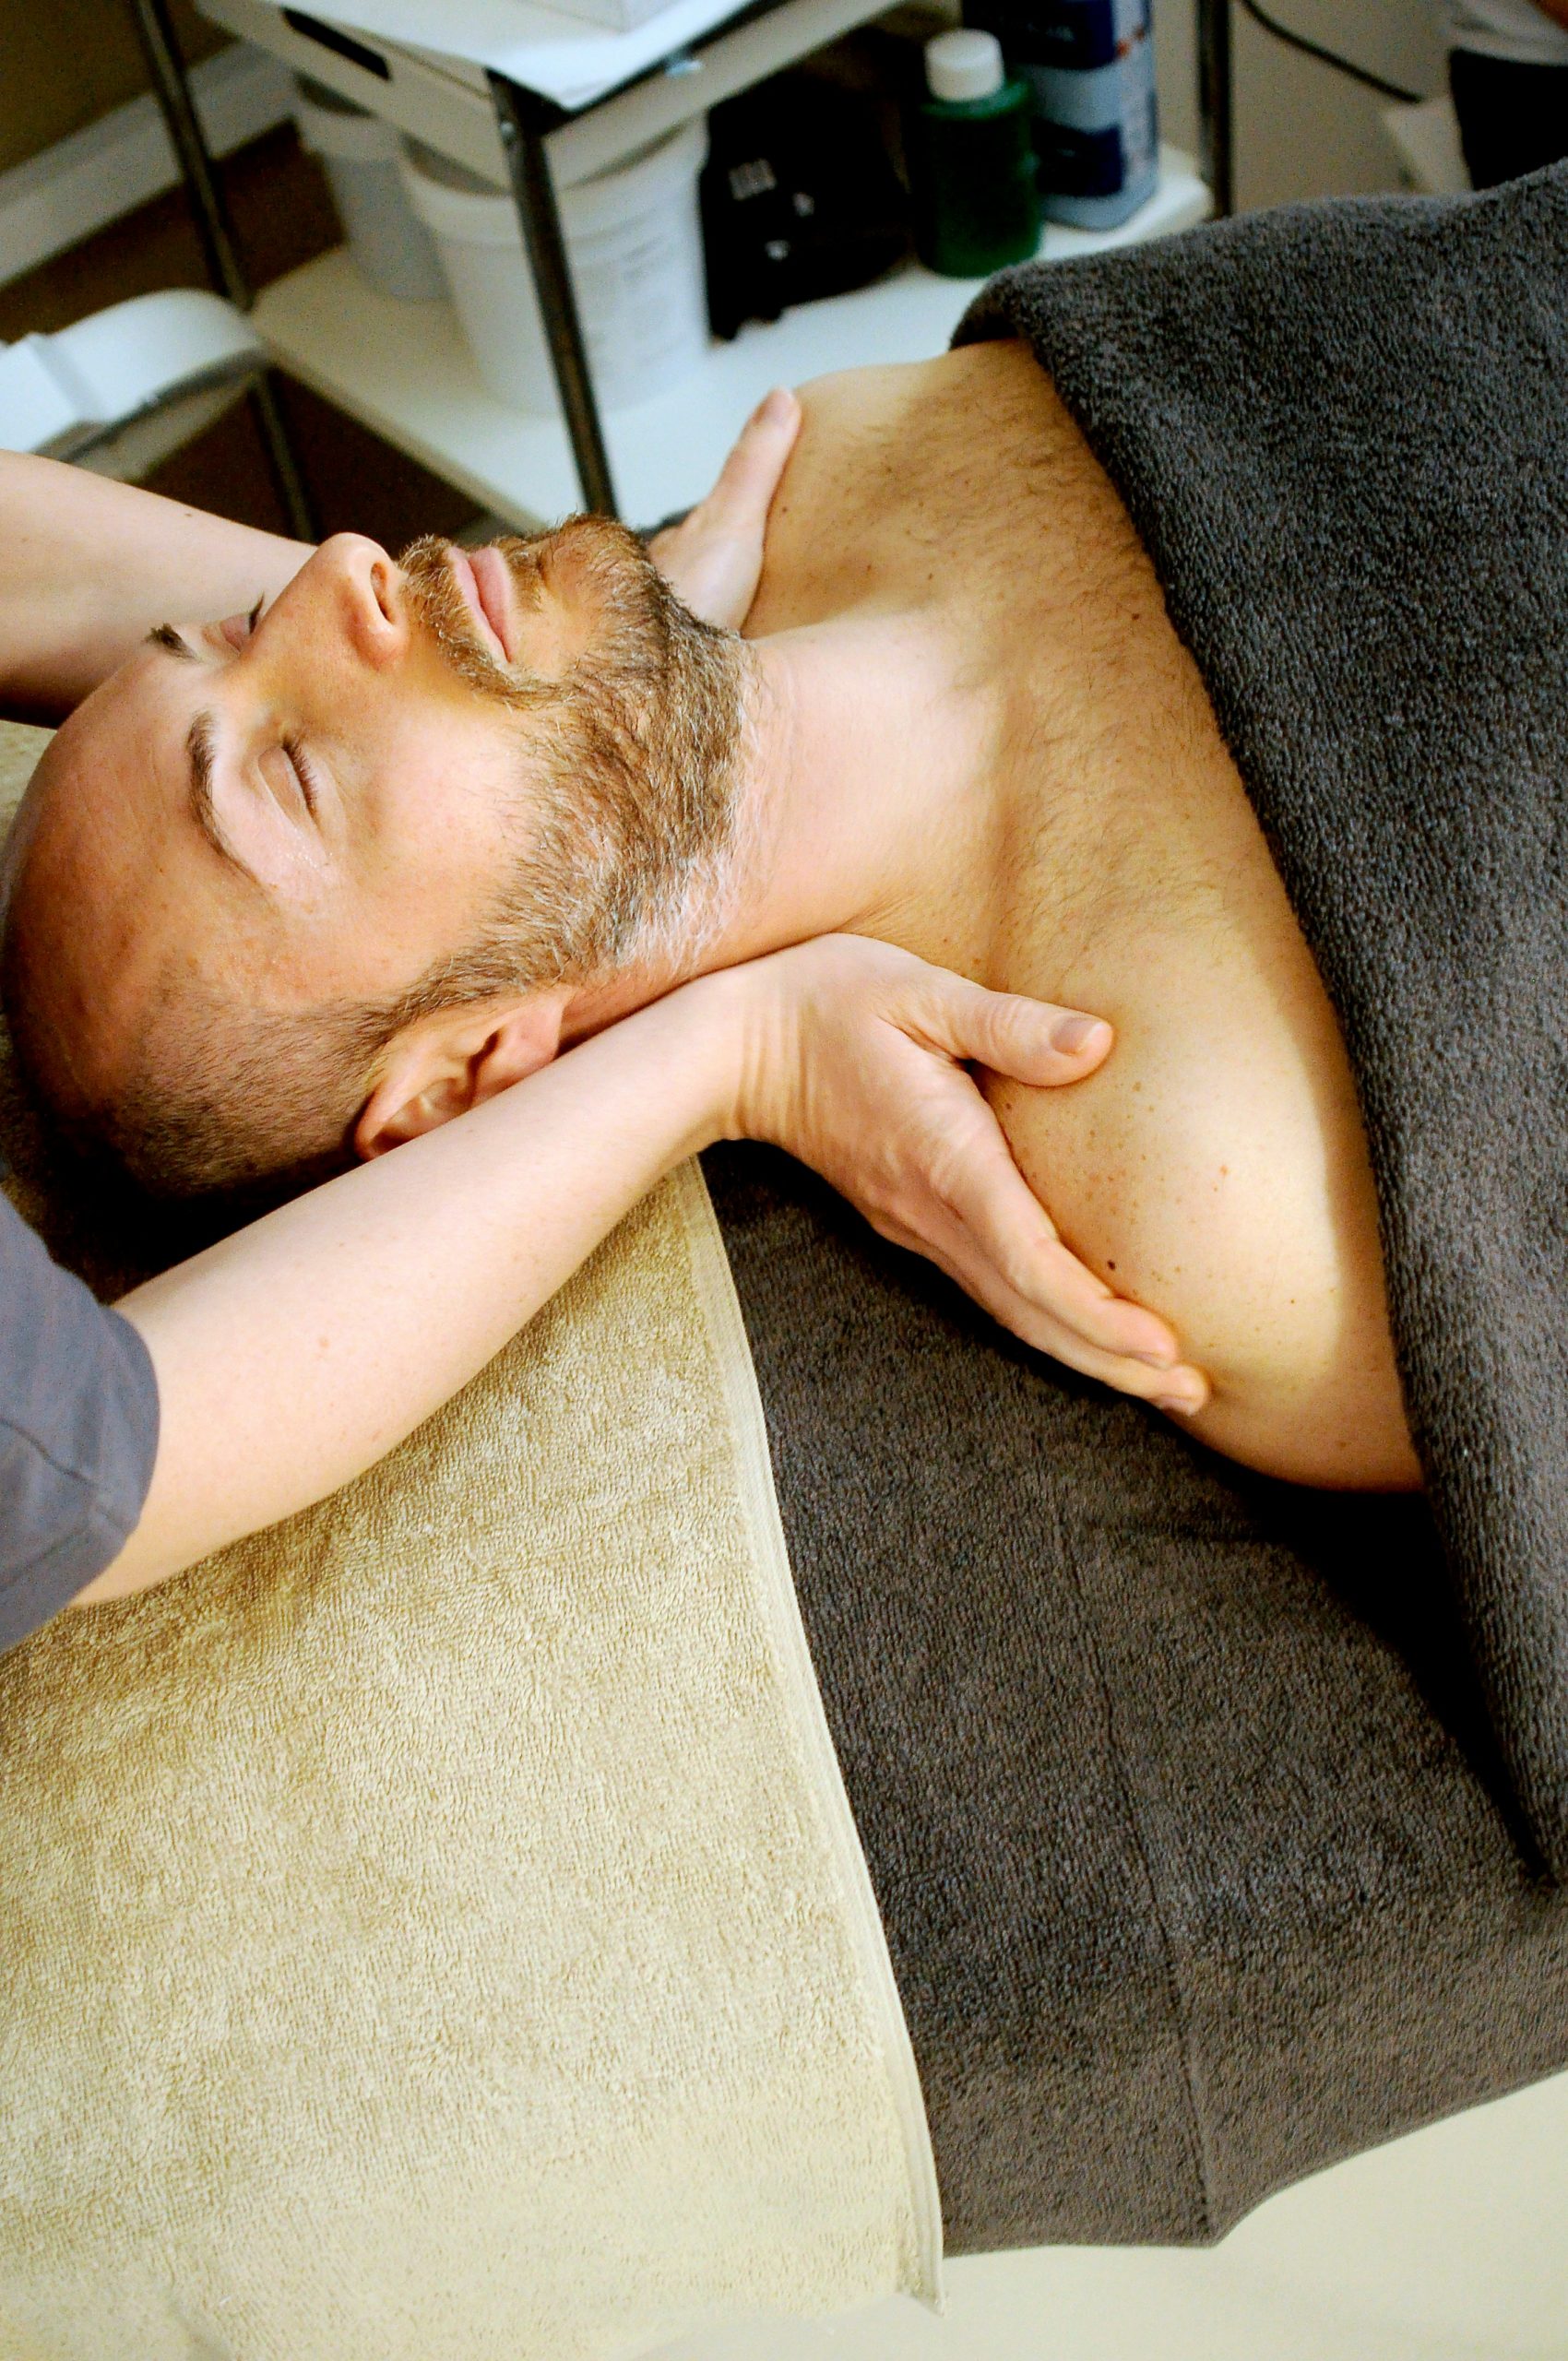 How Tantric Massage Can Improve Well-Being from a Therapeutic Perspective